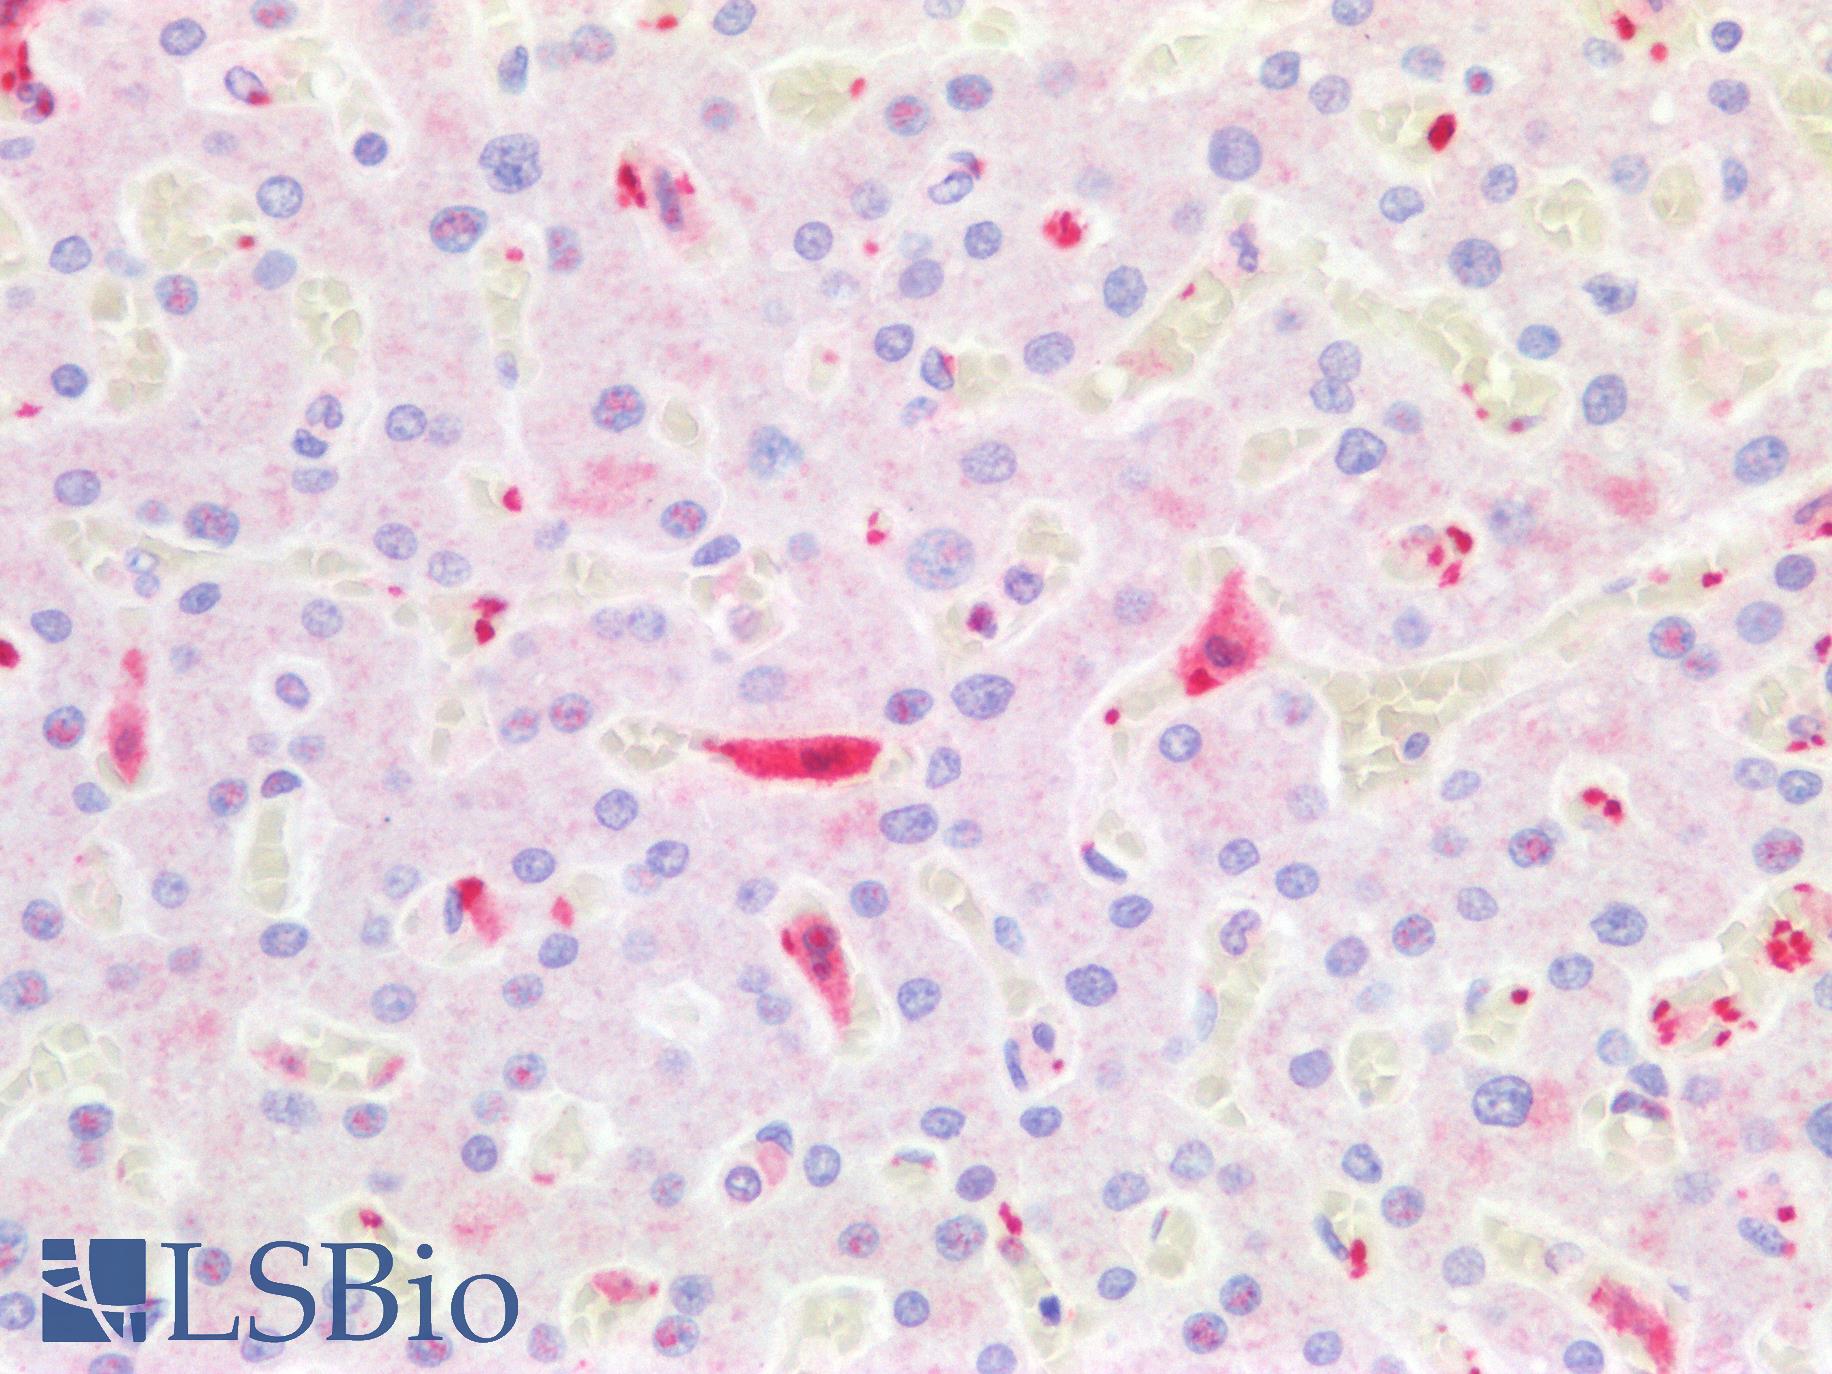 F13A1 / Factor XIIIa Antibody - Human Liver, Kupffer Cells: Formalin-Fixed, Paraffin-Embedded (FFPE)